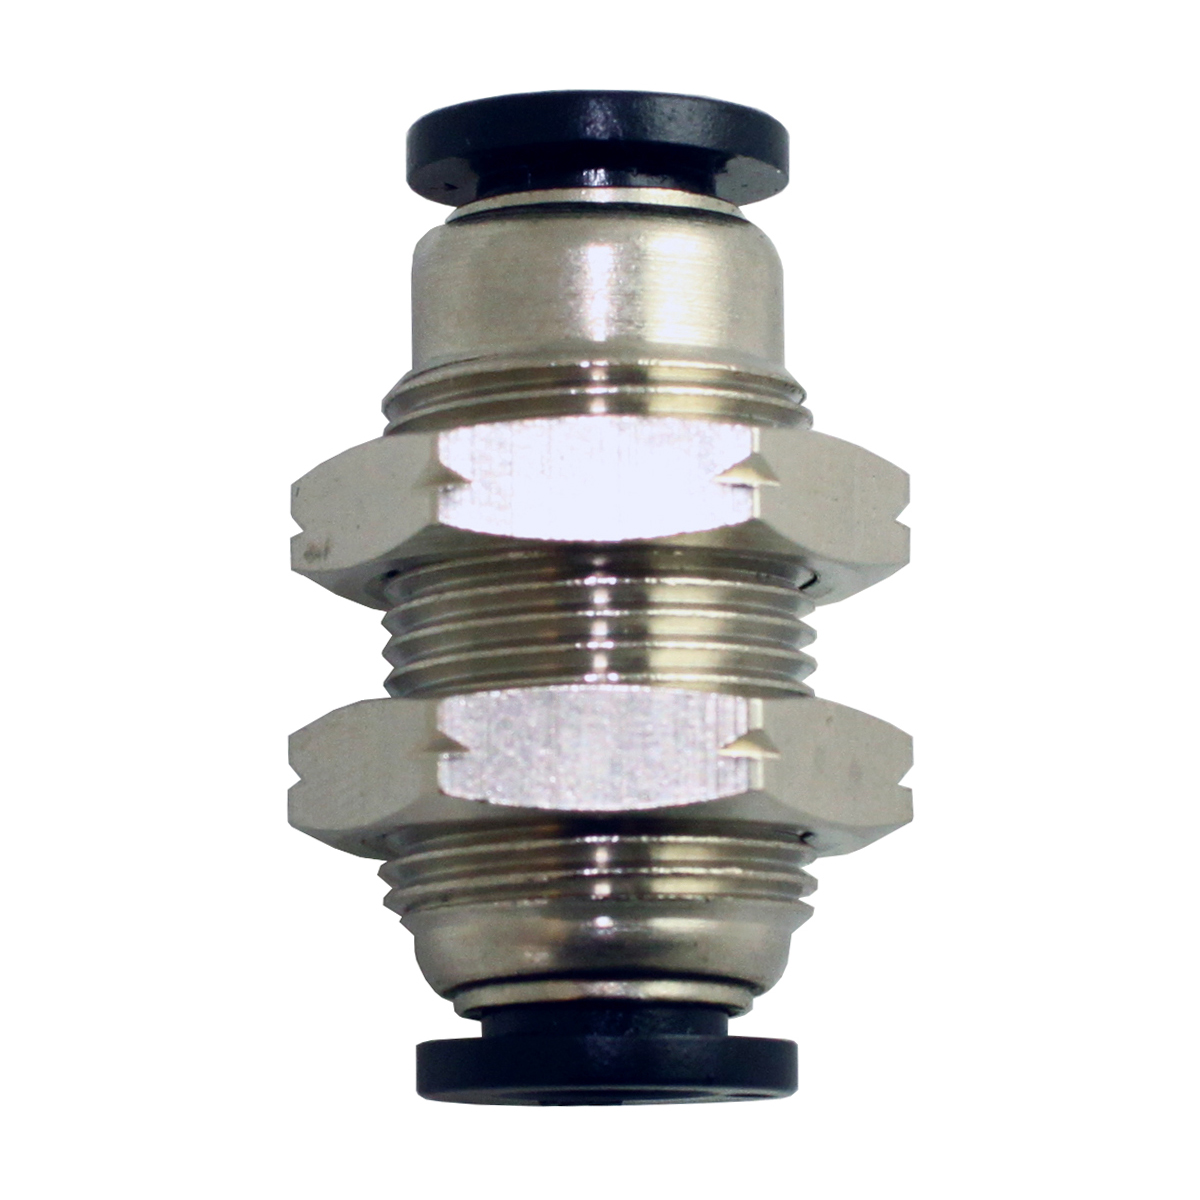 REDUCER 6mm-4mm Straight Push in Pneumatic Tube Fitting Connector Push toConnect 